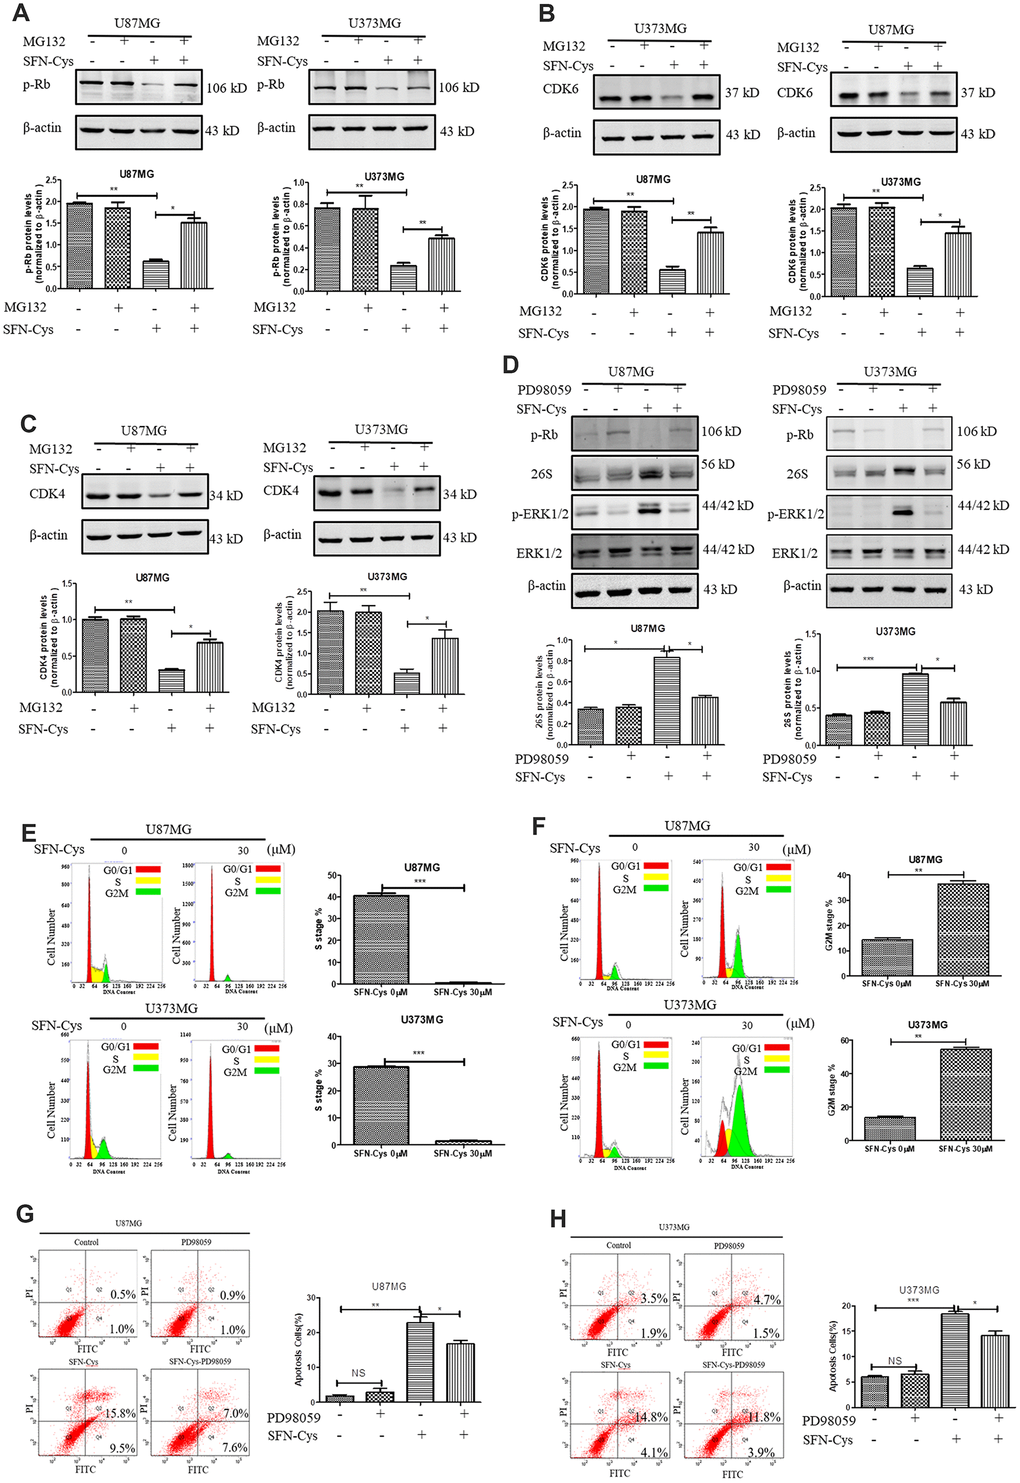 SFN-Cys increased the expression of 26S proteasome via sustained ERK1/2 phosphorylation to degrade cell cycle-related proteins leading to the cell cycle arrest in G0/G1 and G2/M phases. (A–C). The expressions of CDK4, CDK6 and p-Rb were detected by Western blot after the intervention of 30 μM SFN-Cys with or without MG132 (0.5 μM) for 24 h in U87MG and U373MG cells. (D) The expressions of 26S proteasome, ERK1/2 and p-ERK1/2 were detected by Western blot after the treatment of SFN-Cys (30 μM) with or without PD98059 (25 μM) for 24 h in U87MG and U373MG cells. (E) Both U87MG and U373MG cells were starved for 24 h, and then treated with or without SFN-Cys for 24 h. the cell cycles were detected by flow cytometry via Cell Cycle and Apoptosis Analysis Kit. (F) The cell cycles were detected without starvation. (G, H) The apoptosis rates were detected via Annexin V-FITC/PI staining in U87MG and U373MG cells after treatment of SFN-Cys (30 μM) with or without PD98059 (25 μM) for 24 h. The percentages of apoptotic cells were detected by flow cytometry. Data were shown as *P 